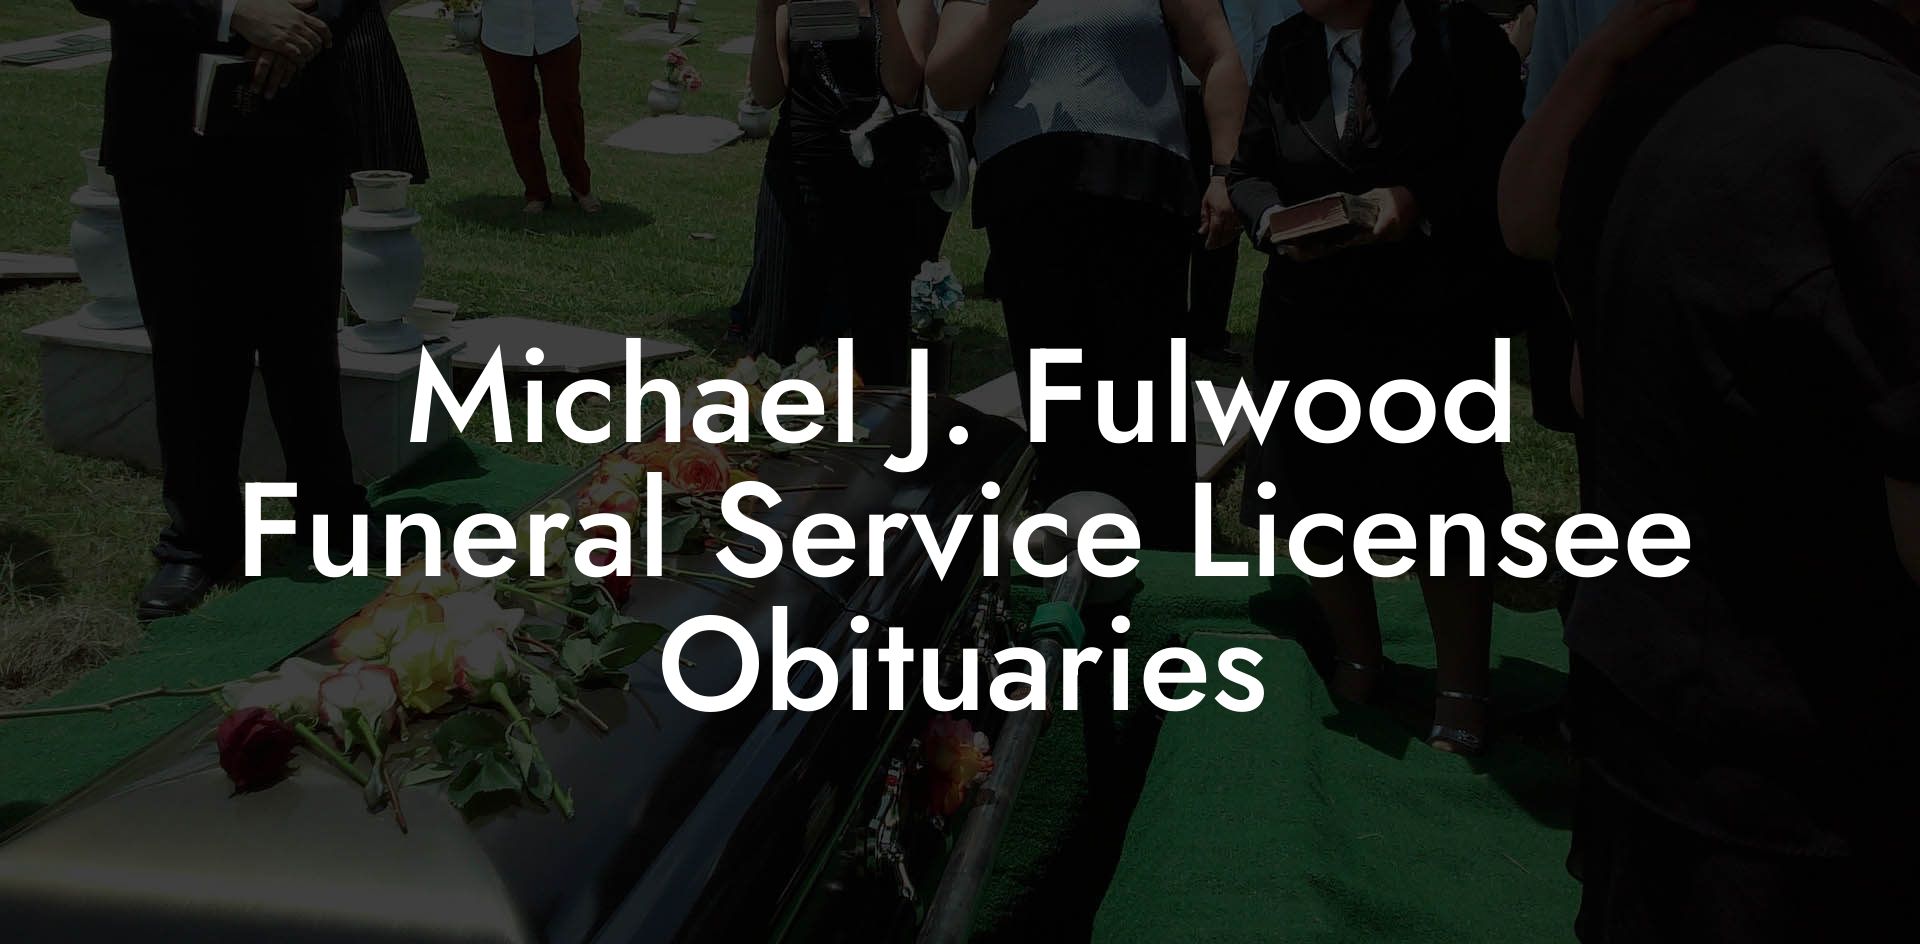 Michael J. Fulwood Funeral Service Licensee Obituaries